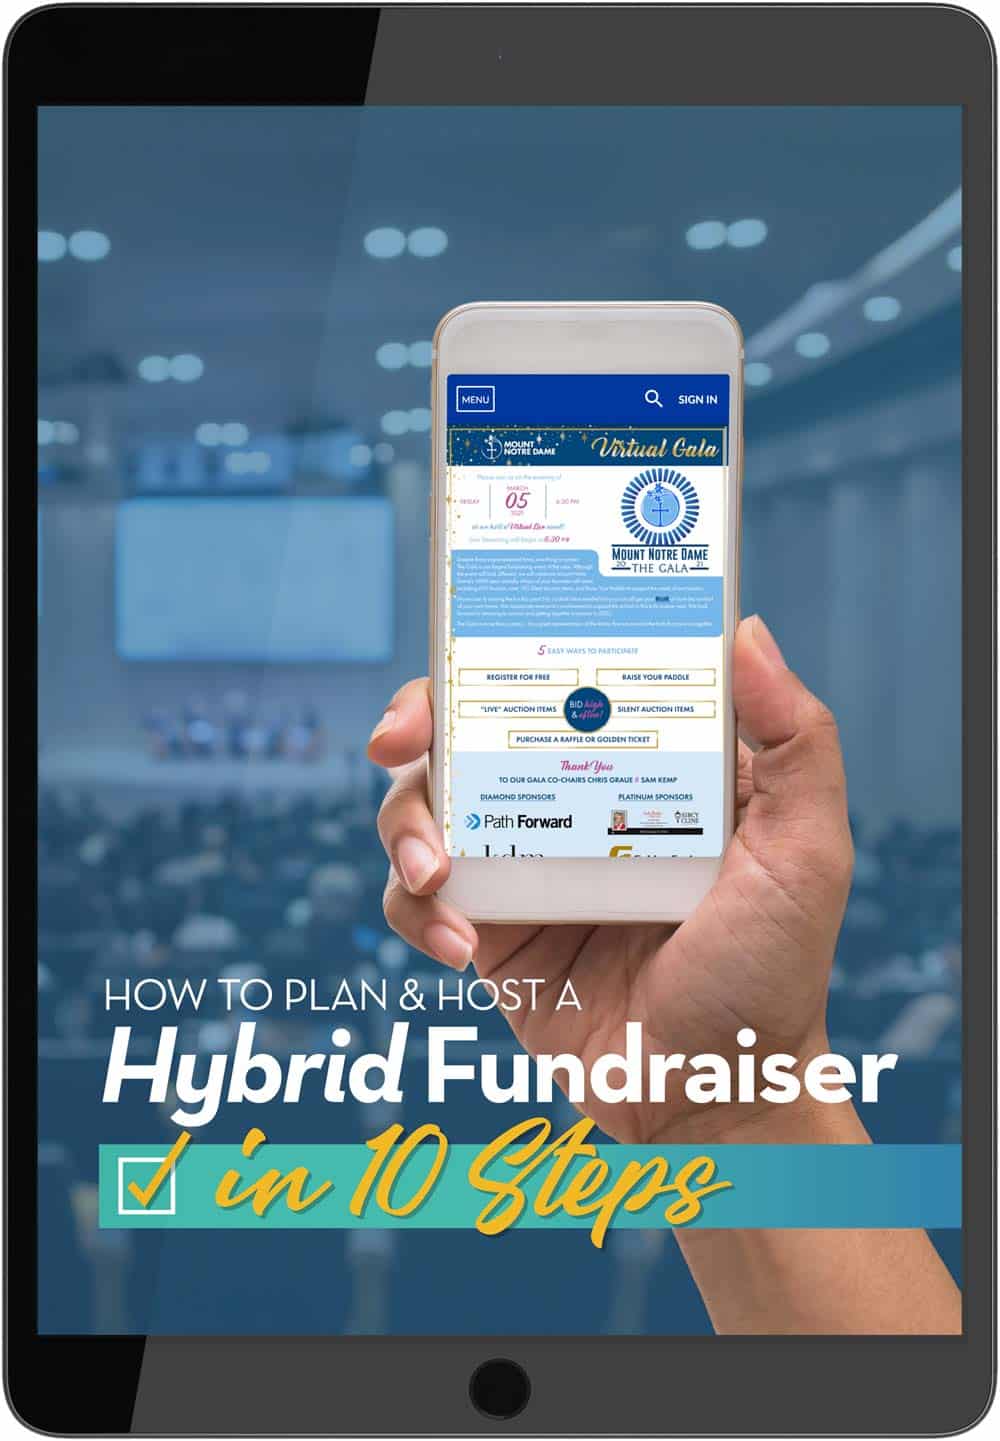 How-to-Plan-and-Host-a-Hybrid-Fundraiser-in-10-Steps-iPad